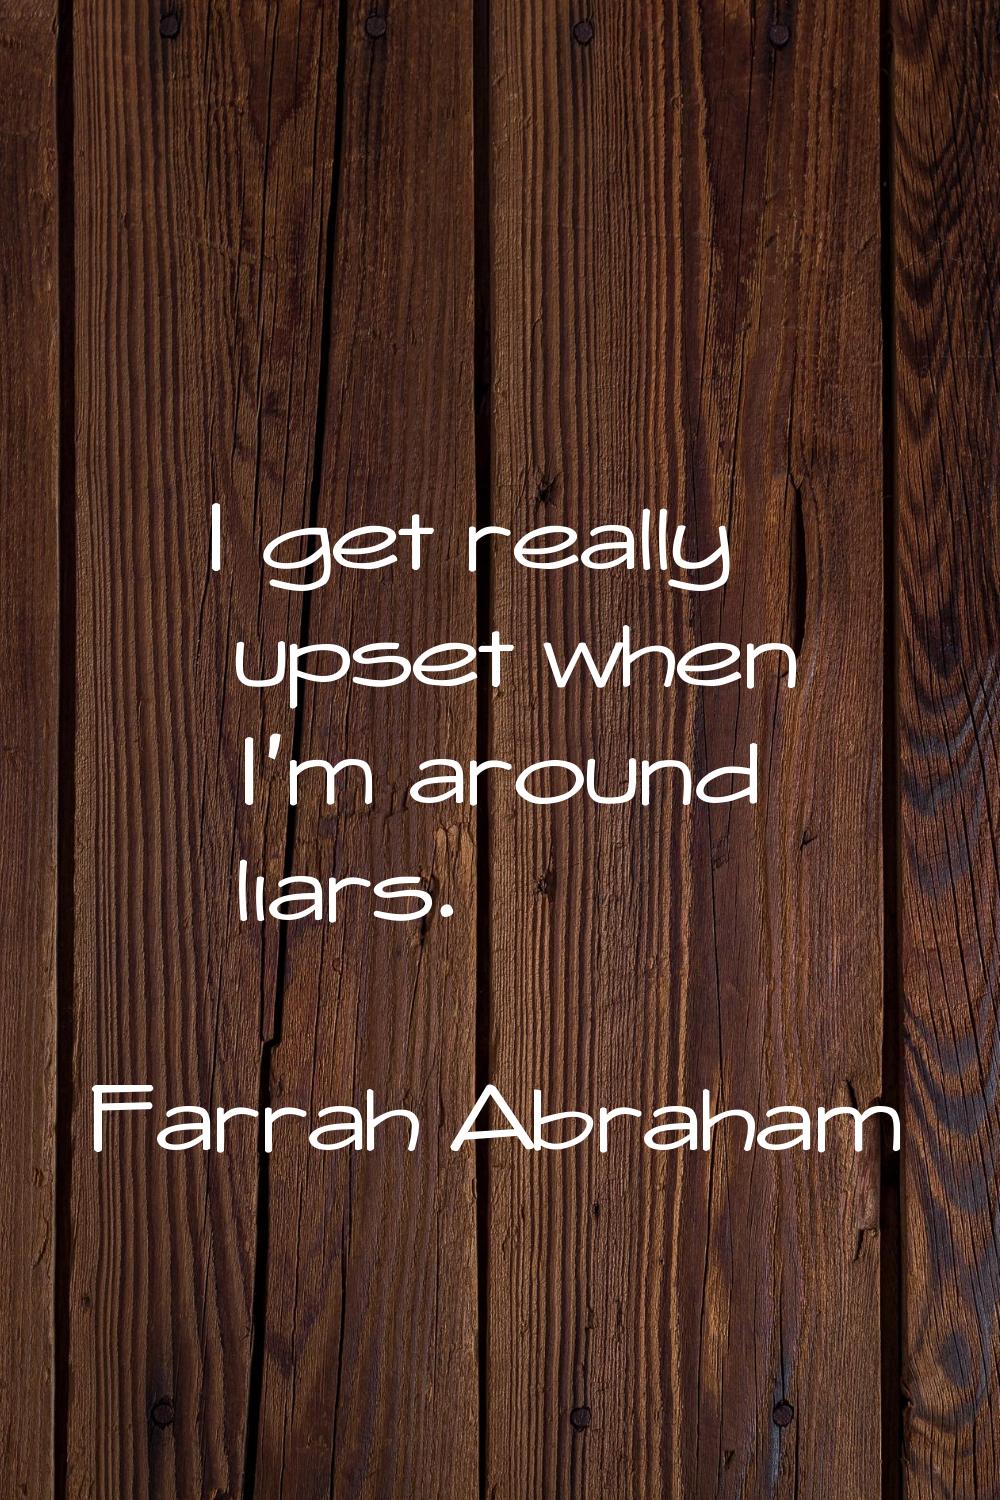 I get really upset when I'm around liars.